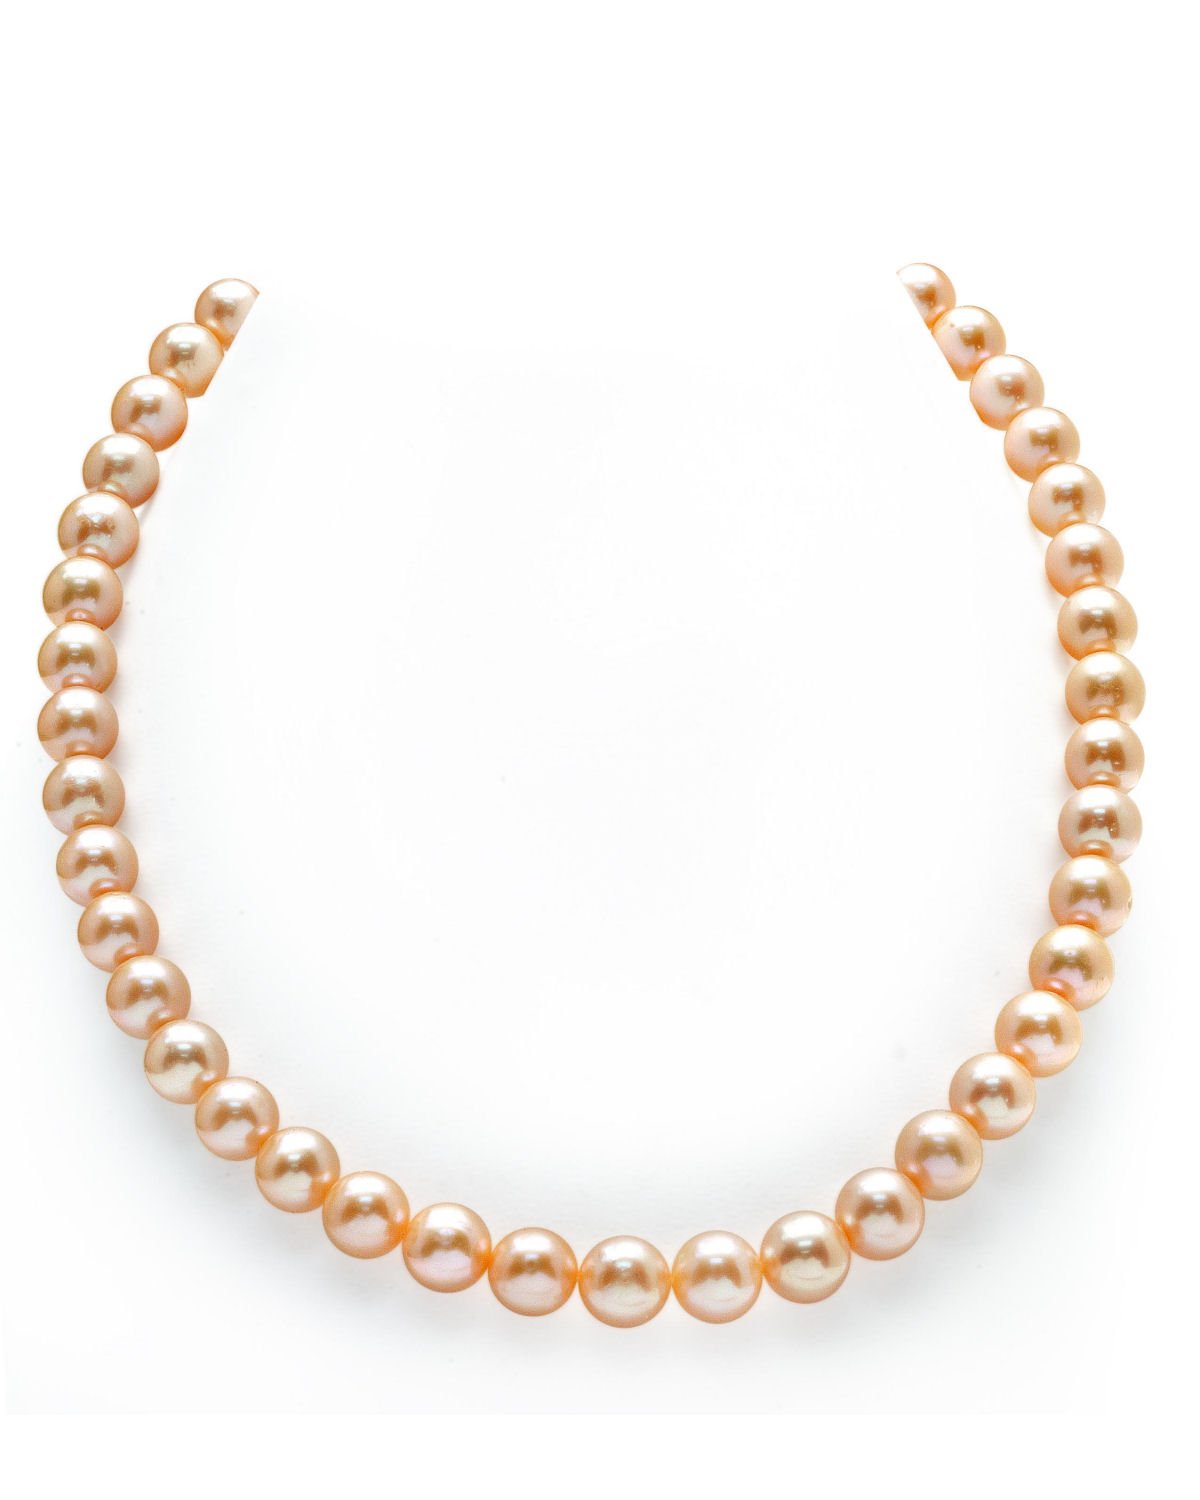 8.5-9.5mm Peach Freshwater Pearl Necklace - AAAA Quality